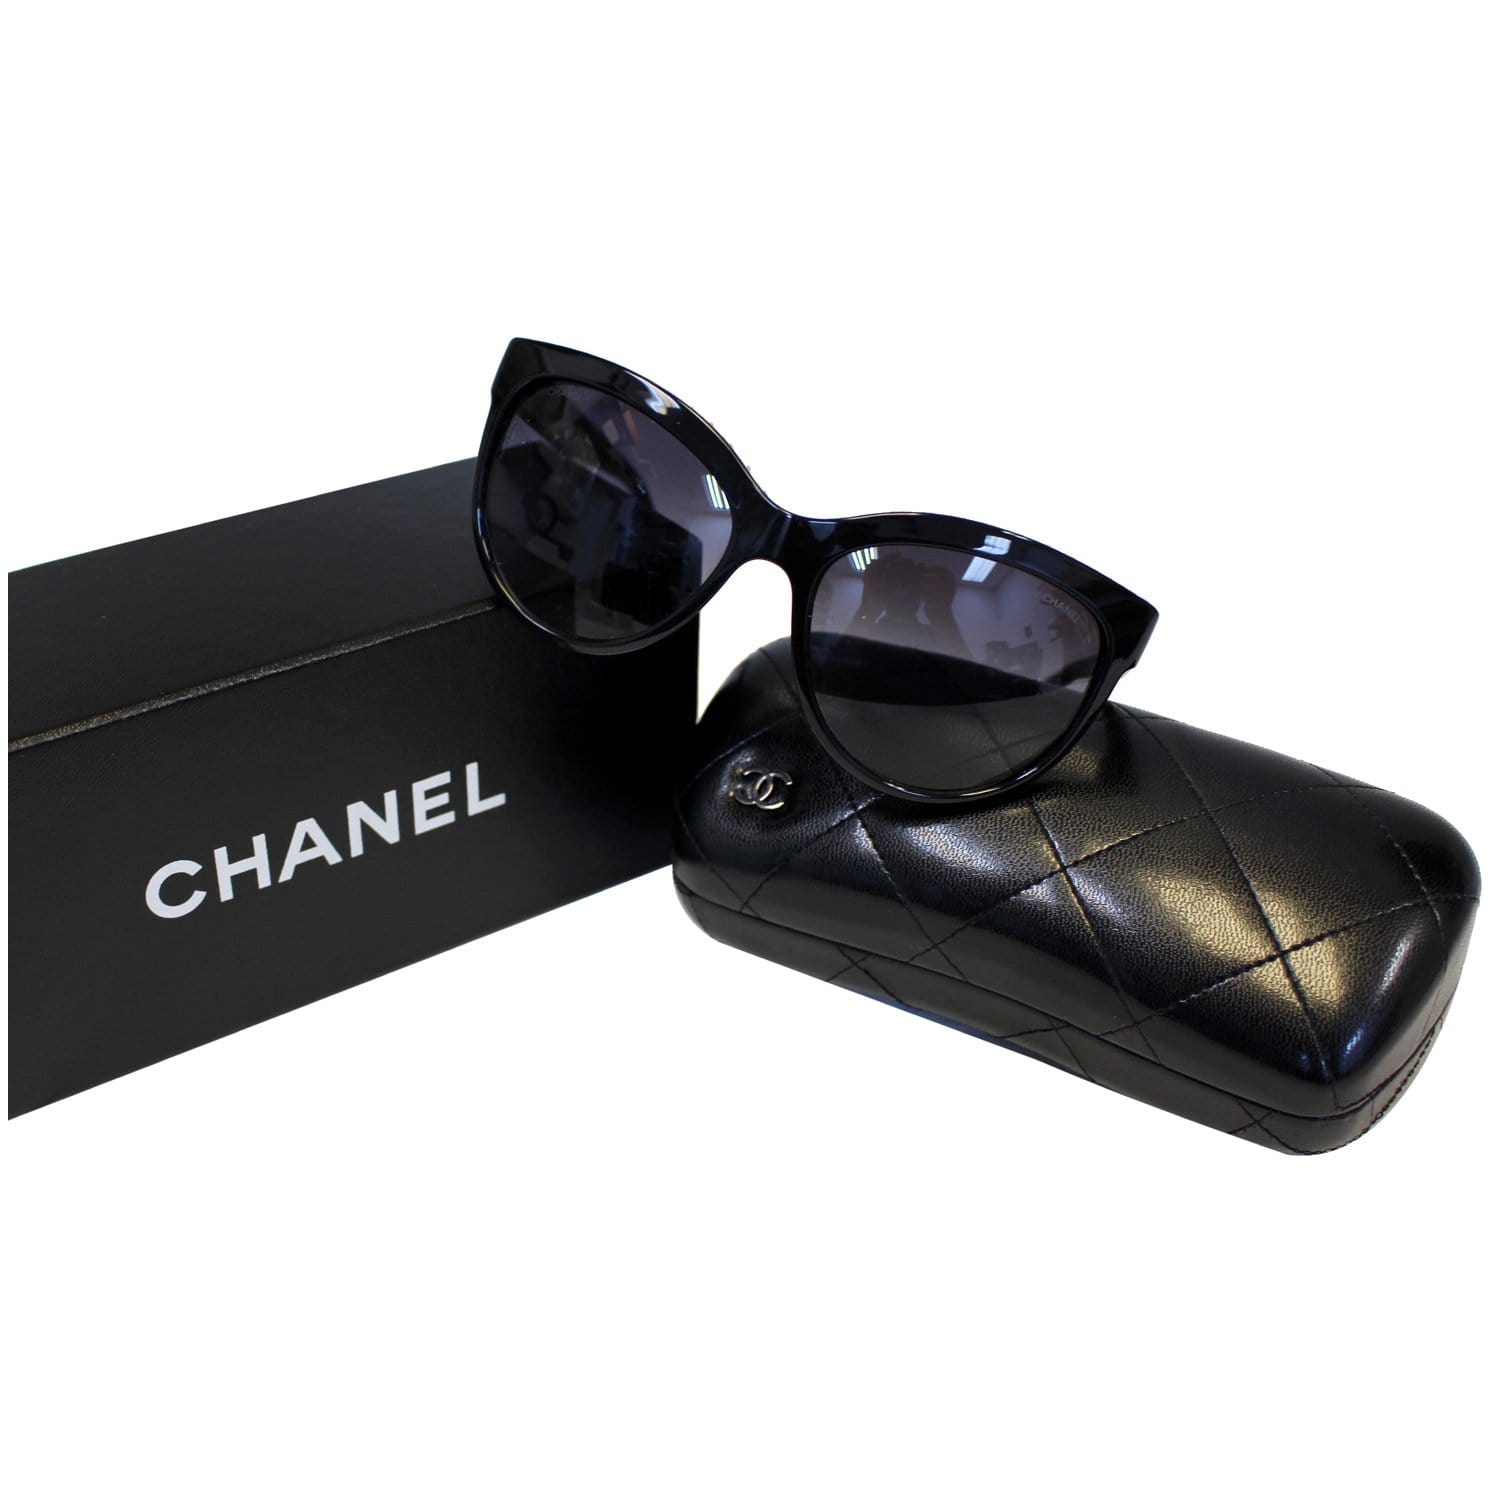 Chanel Coco Cloud Collection Black 18k EP Sunglasses 5378 56mm